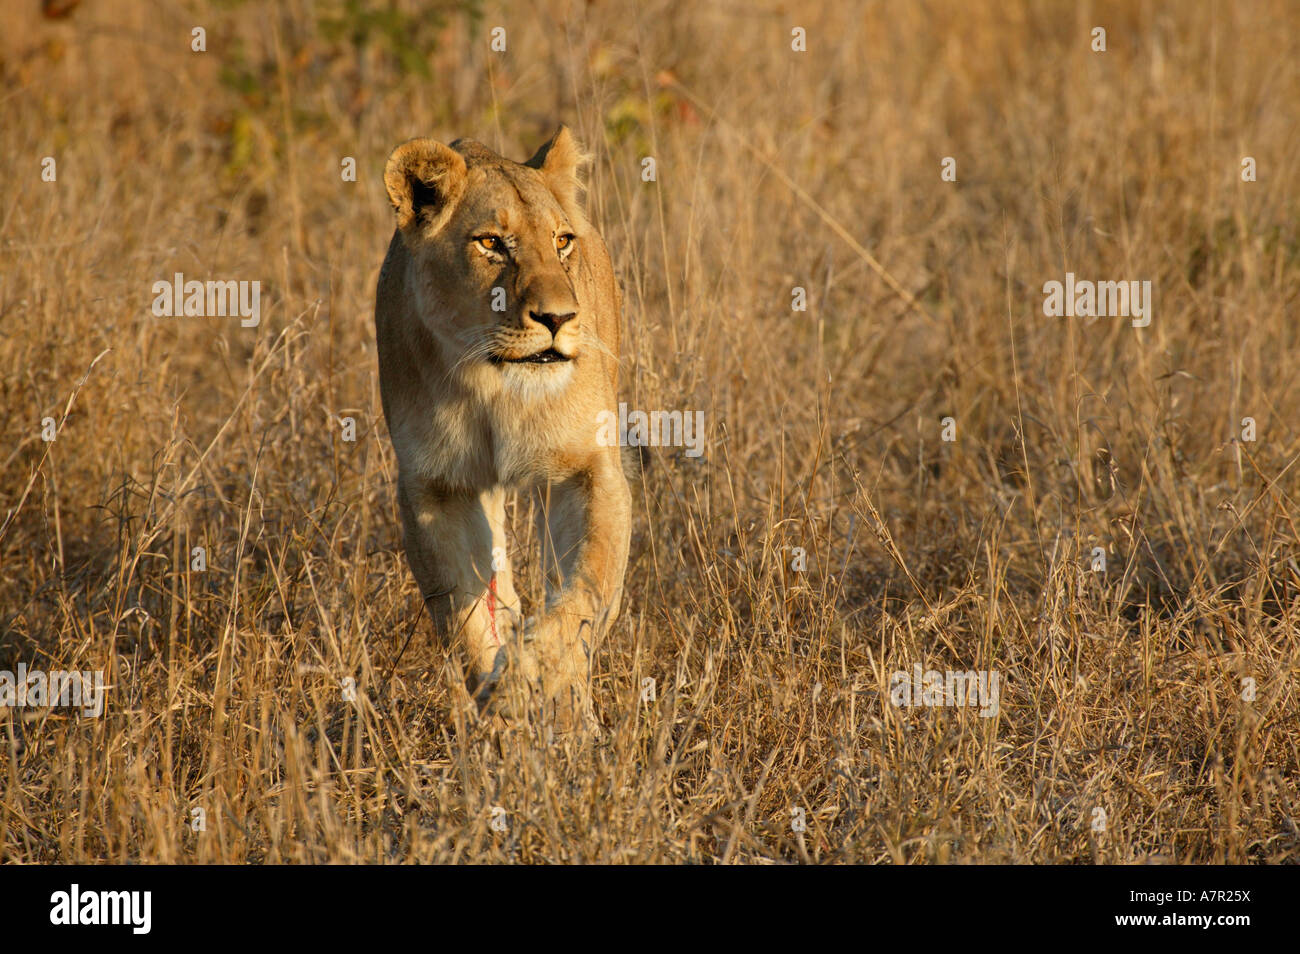 Lioness with a bleeding wound on one foreleg walking towards the camera in long dry grass. Stock Photo